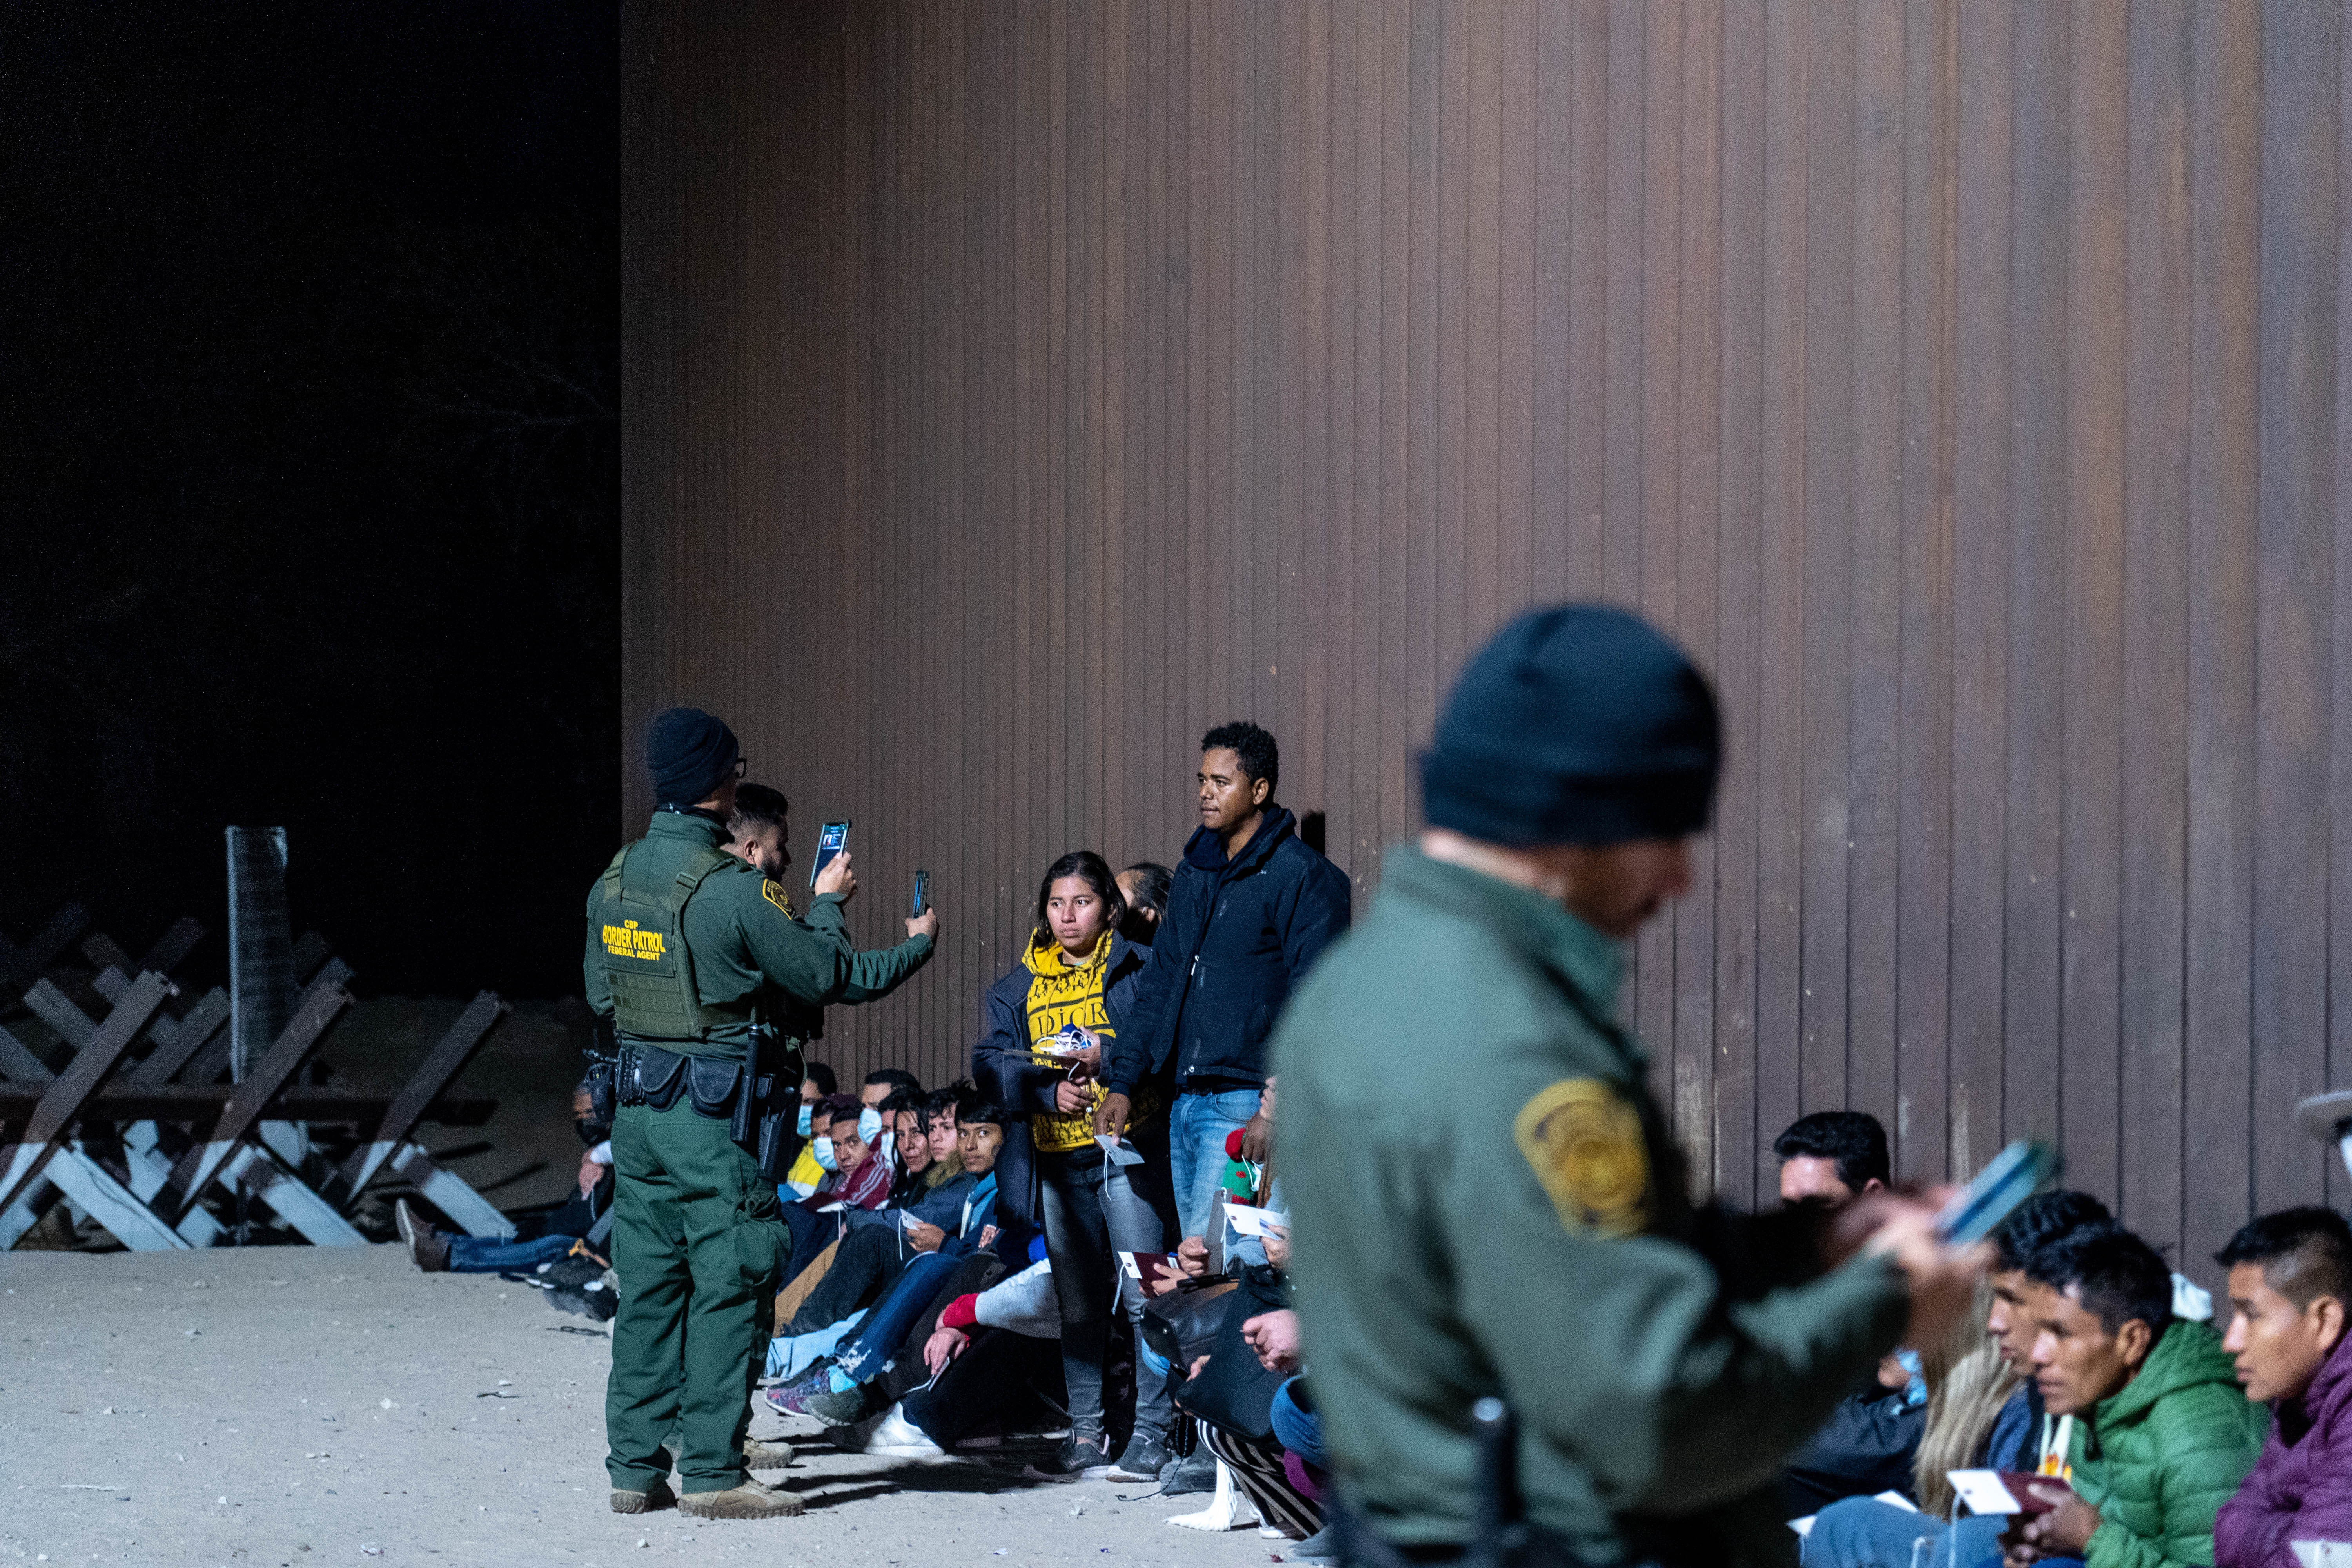 Because Title 42 forced migrants seeking asylum to stay in Mexico, many people were left essentially stranded, with no protection from either government.